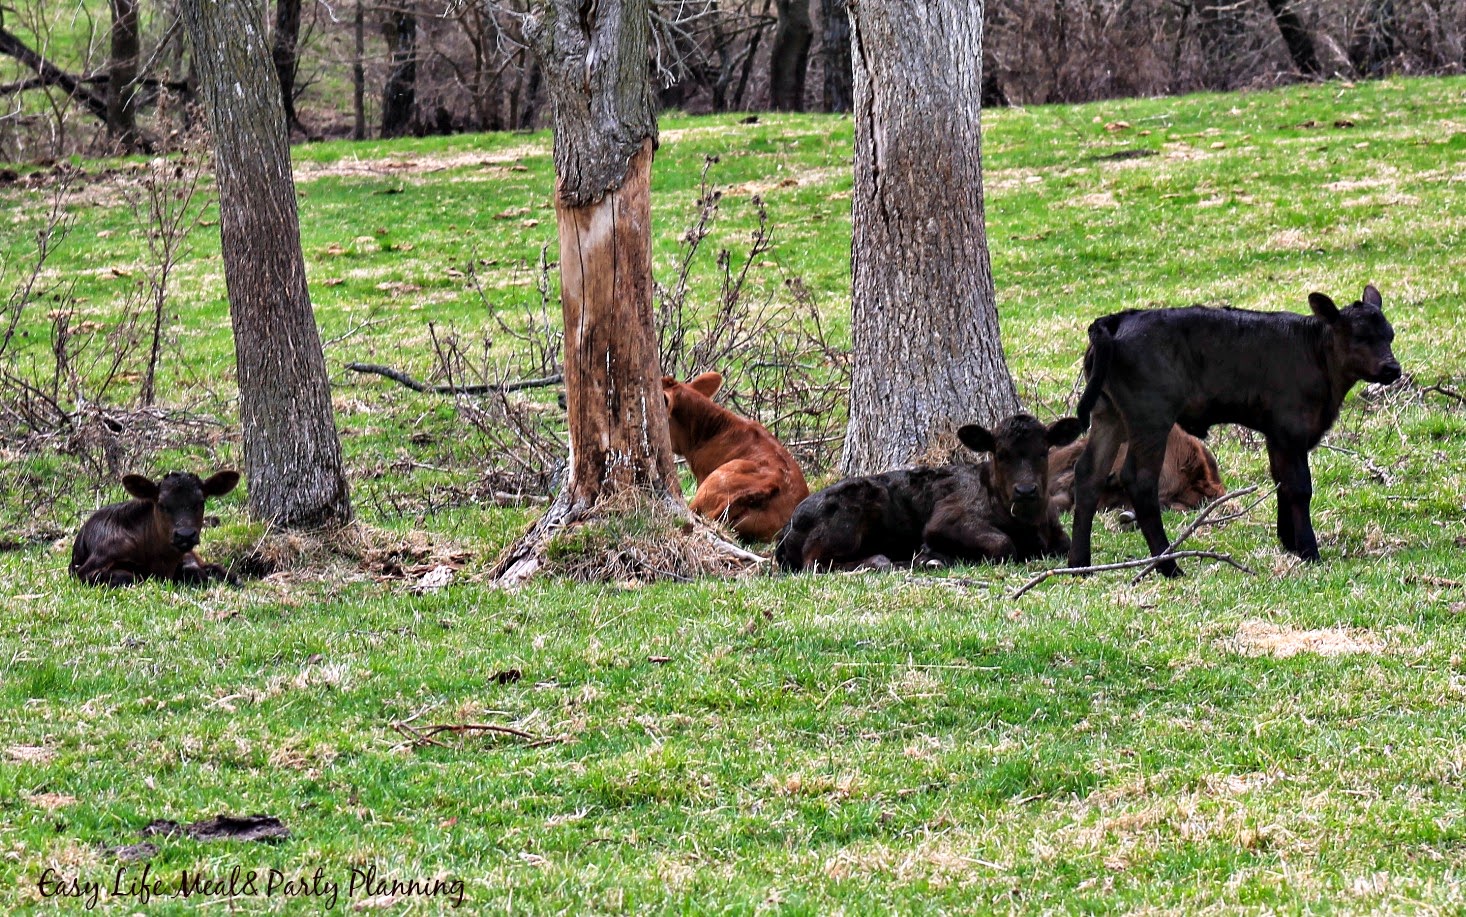 Easter on the Farm baby calves - Easy Life Meal & Party Planning